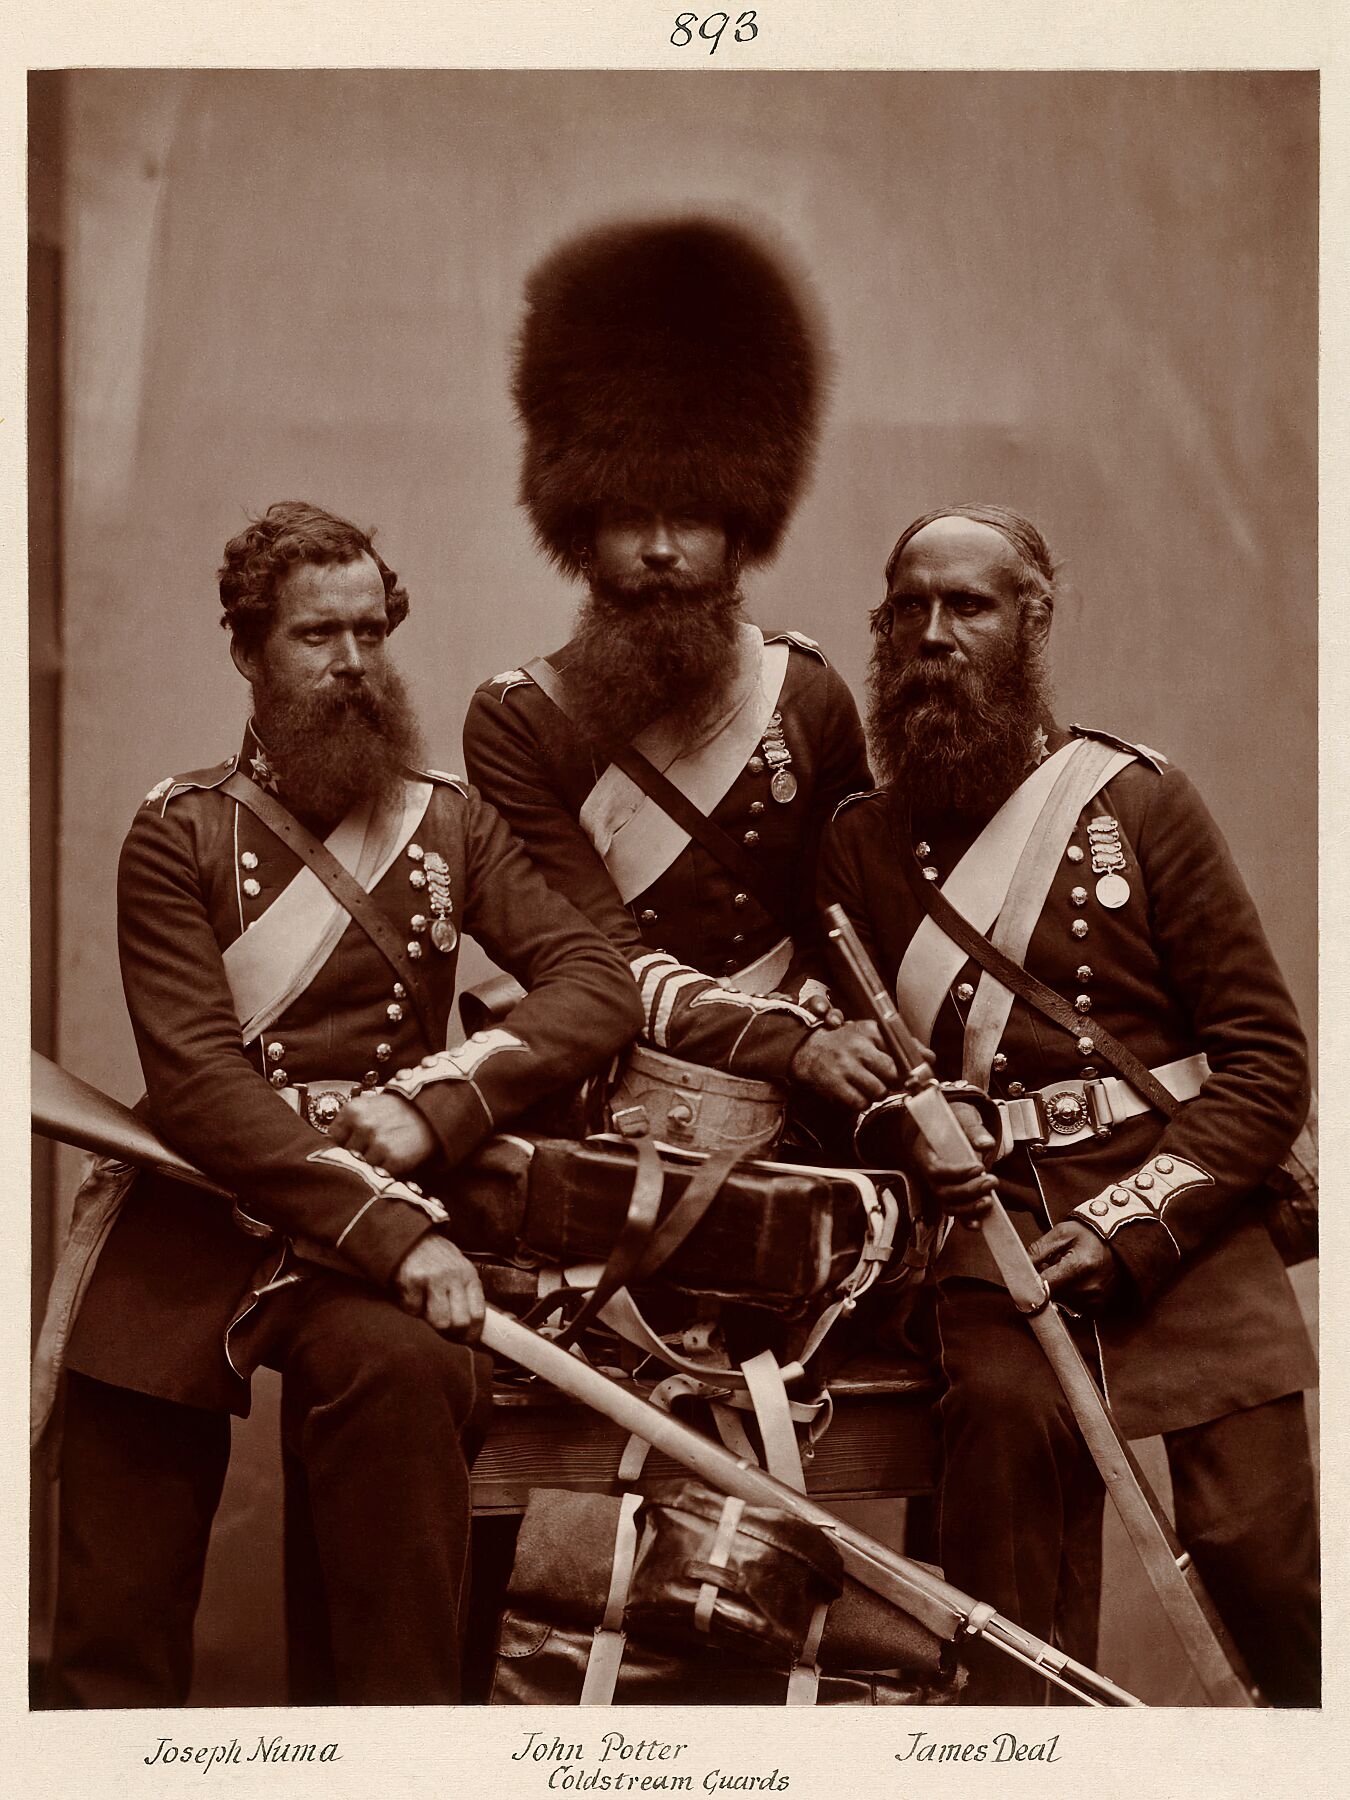 Hughes & Mullins after Cundall & Howlett - Heroes of the Crimean War - Joseph Numa, John Potter, and James Deal of the Coldstream Guards - 1856